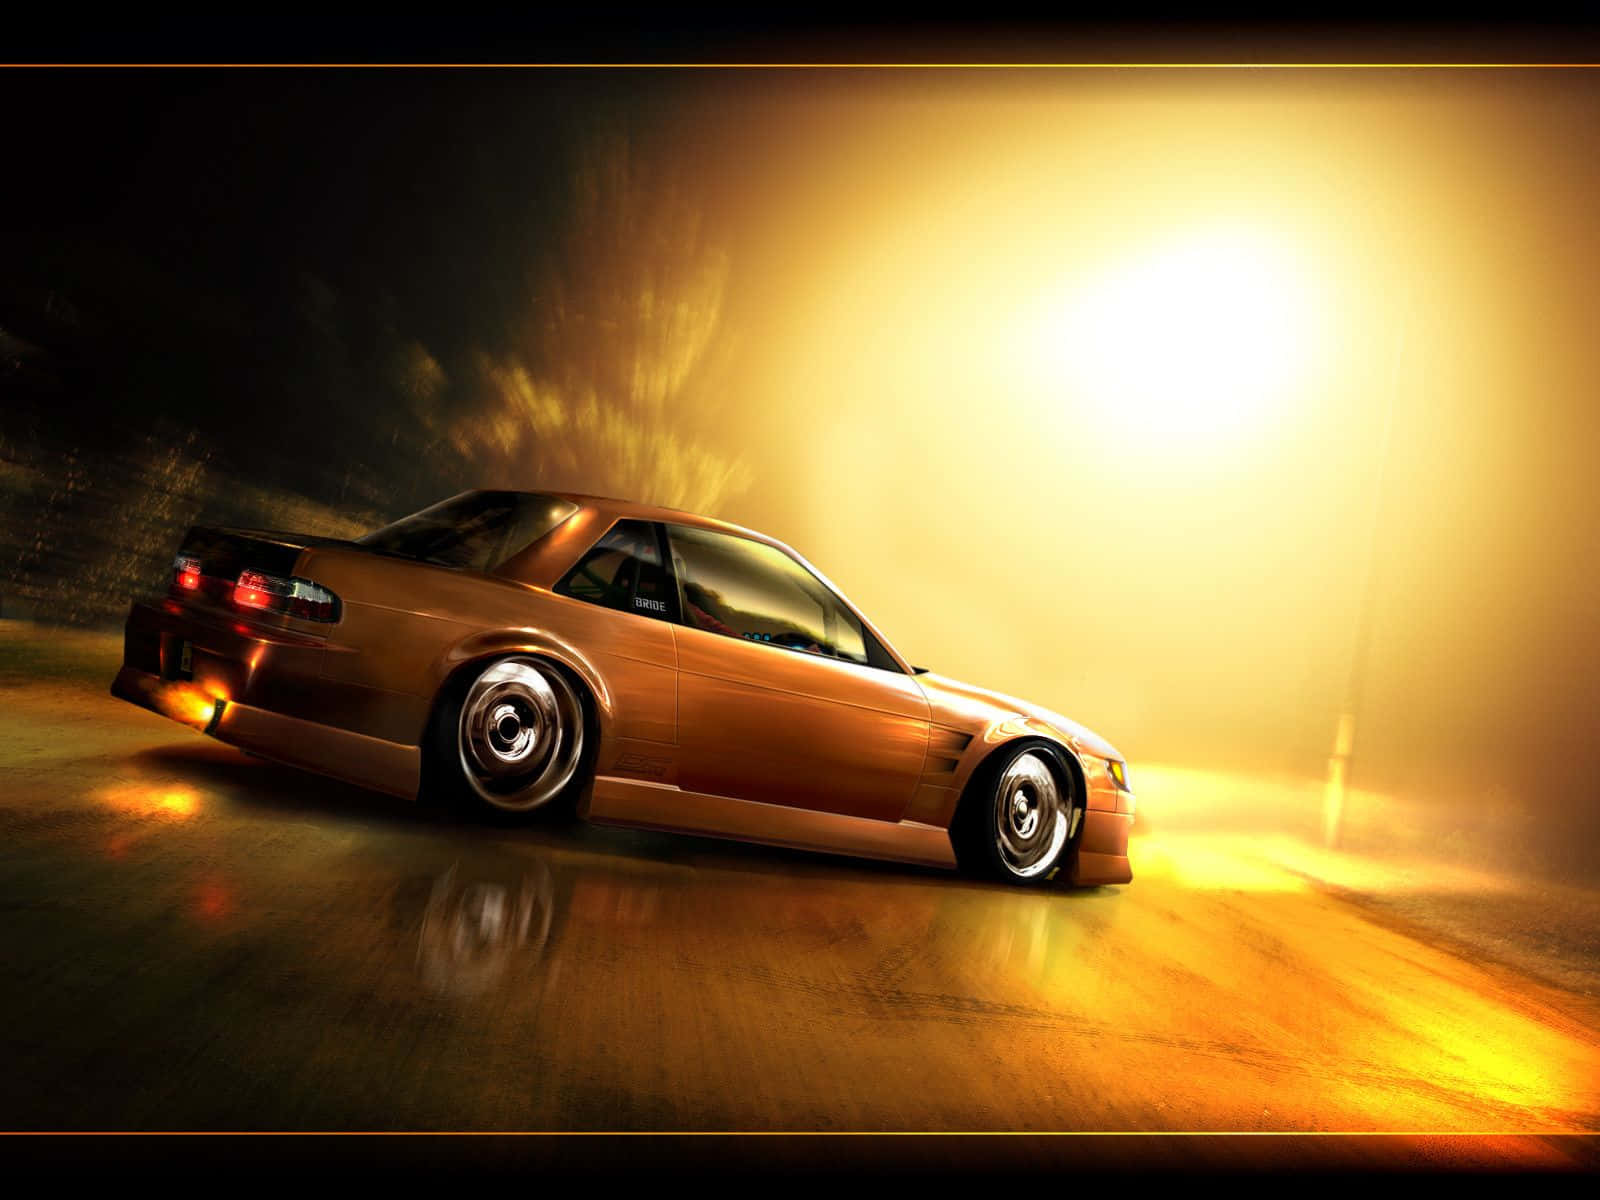 Nissan Silvia S13: An Iconic Japanese Sports Car Wallpaper